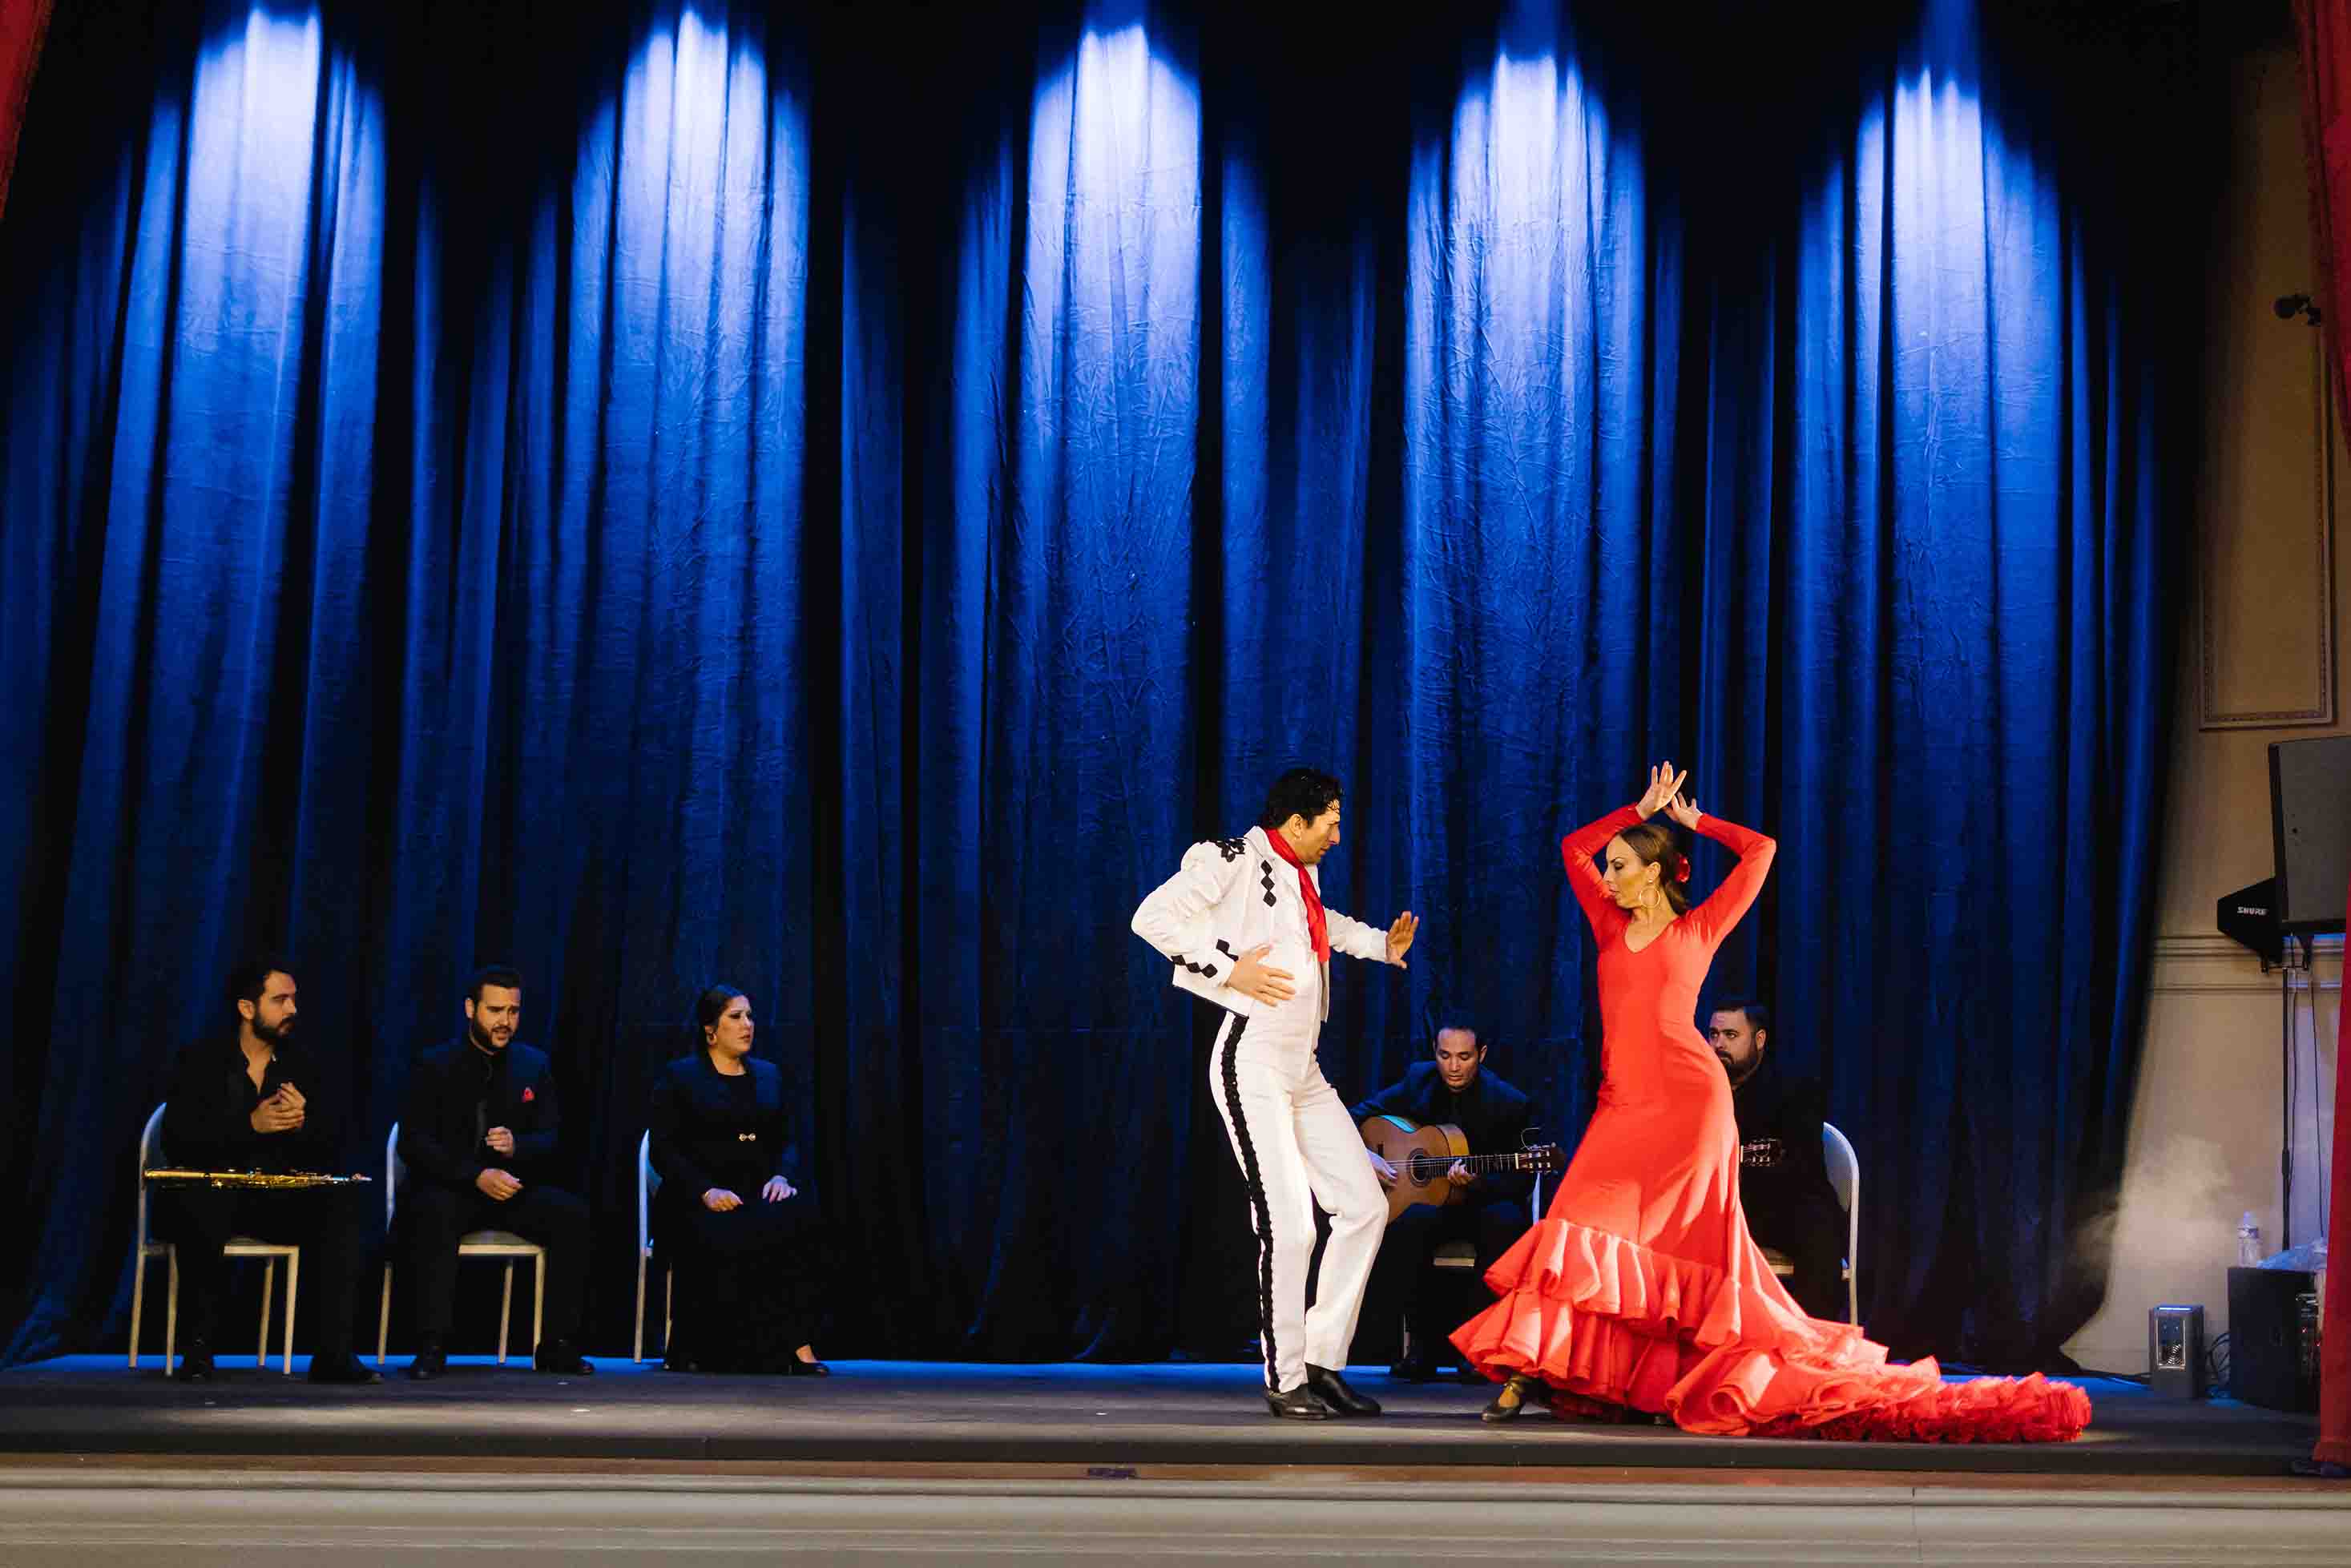 A man dancing flamenco at the Authentic Flamenco show in NYC - Authentic Flamenco in Brussel: Traditioneel Spaanse Show